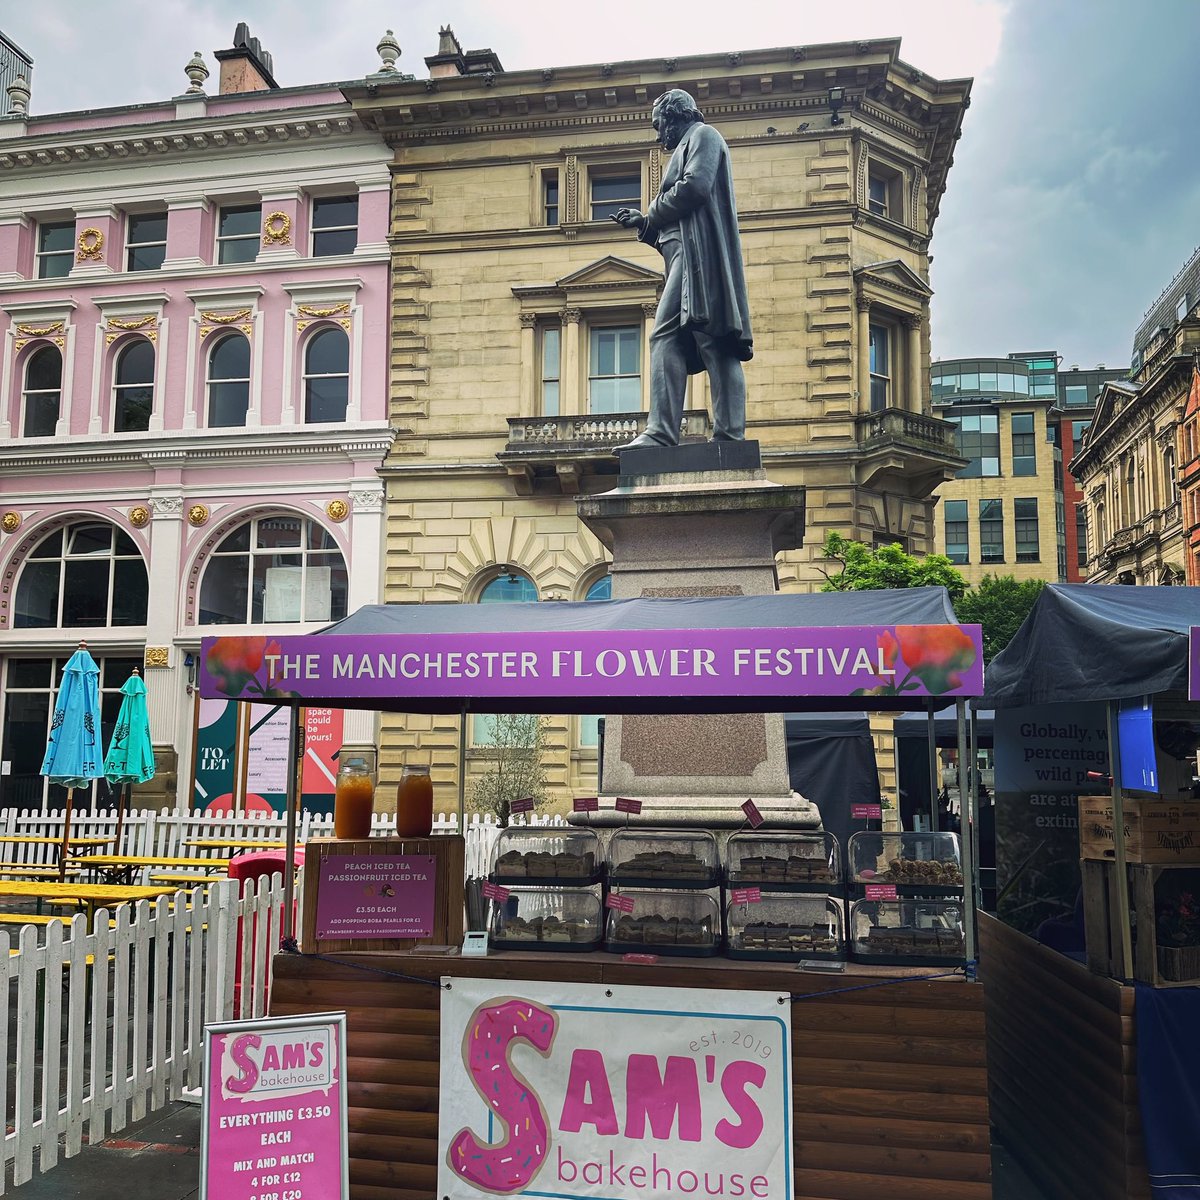 🌸It’s the last day of the Manchester Flower Festival!🌸 Find us in St Anne’s Square next to the statue 🙌🔥